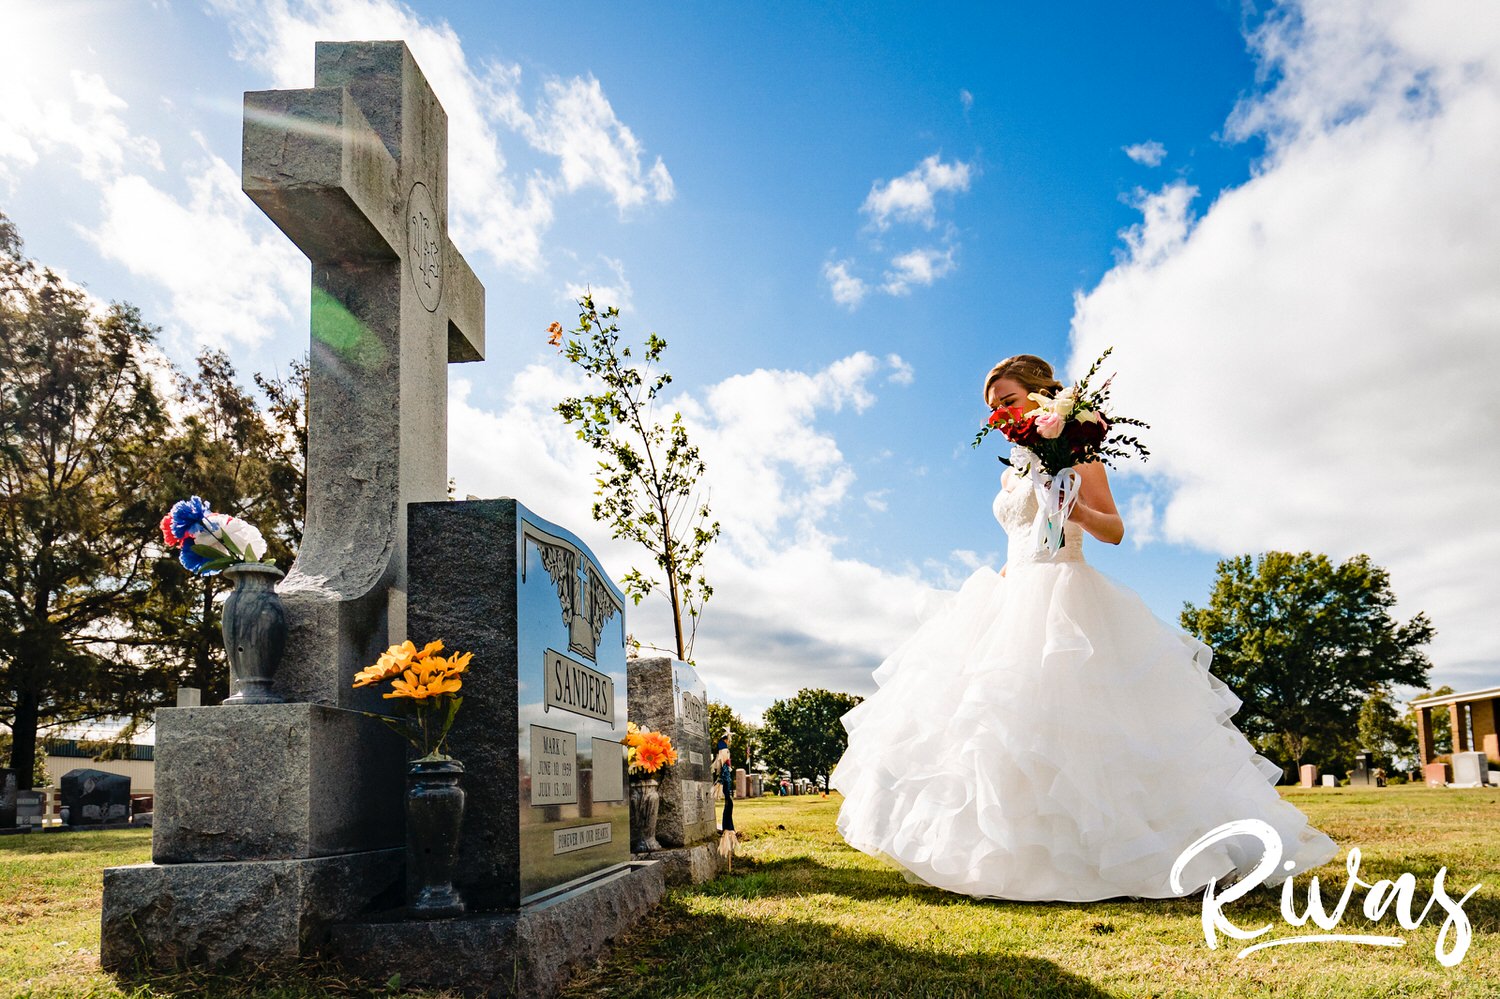 A vibrant image of a bride in a wedding gown walking towards her father's gravestone on her wedding day as the sun breaks through the clouds behind her. 